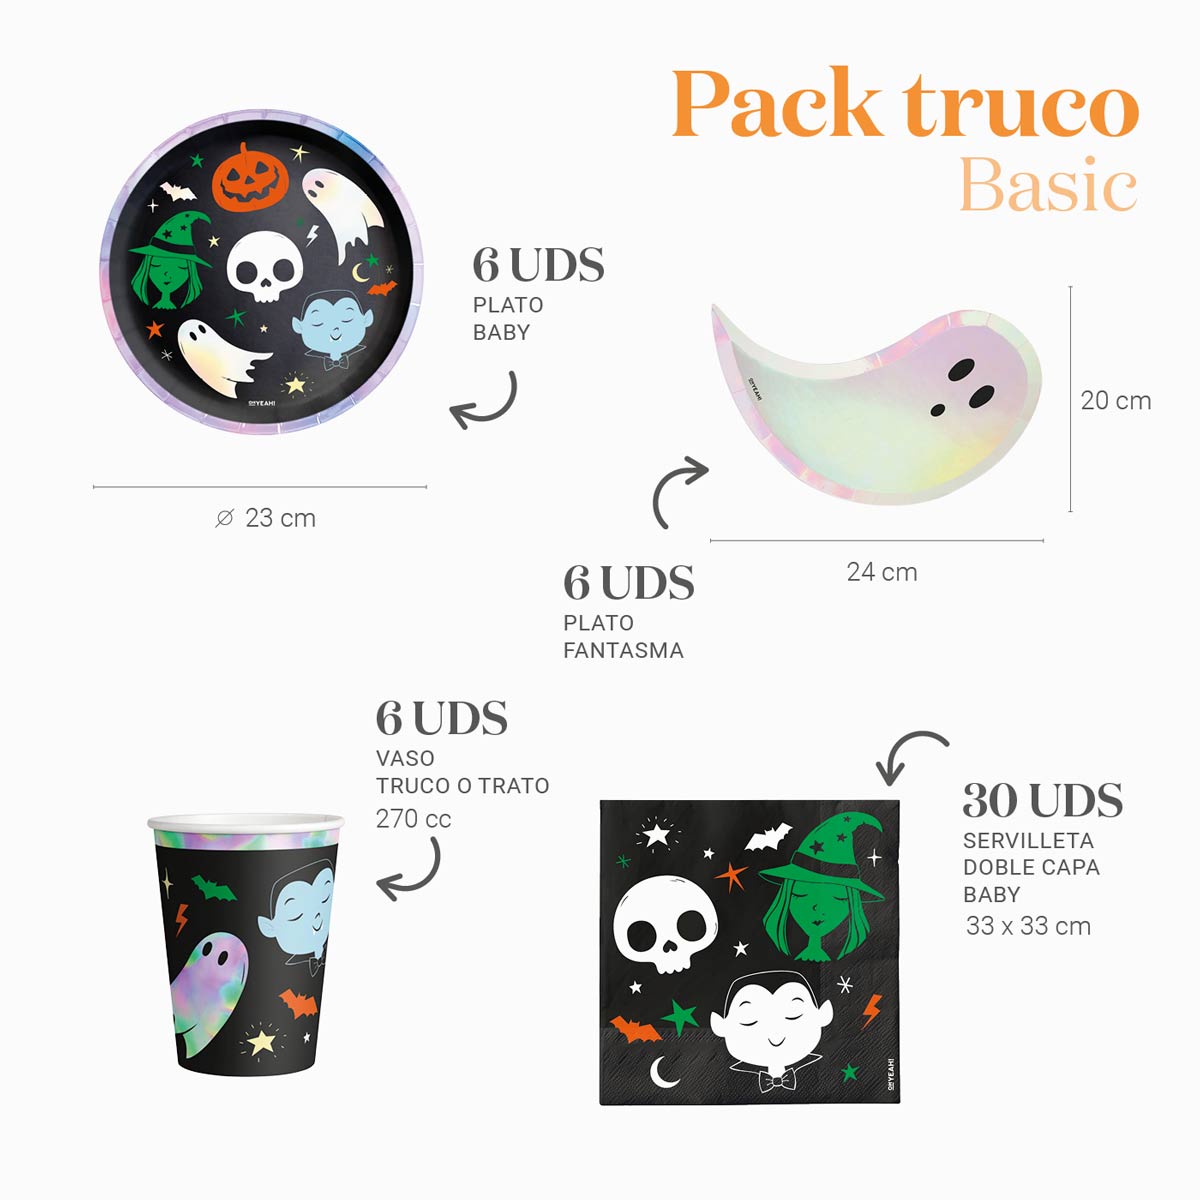 Basic Trico or Treatment Kit 6 people